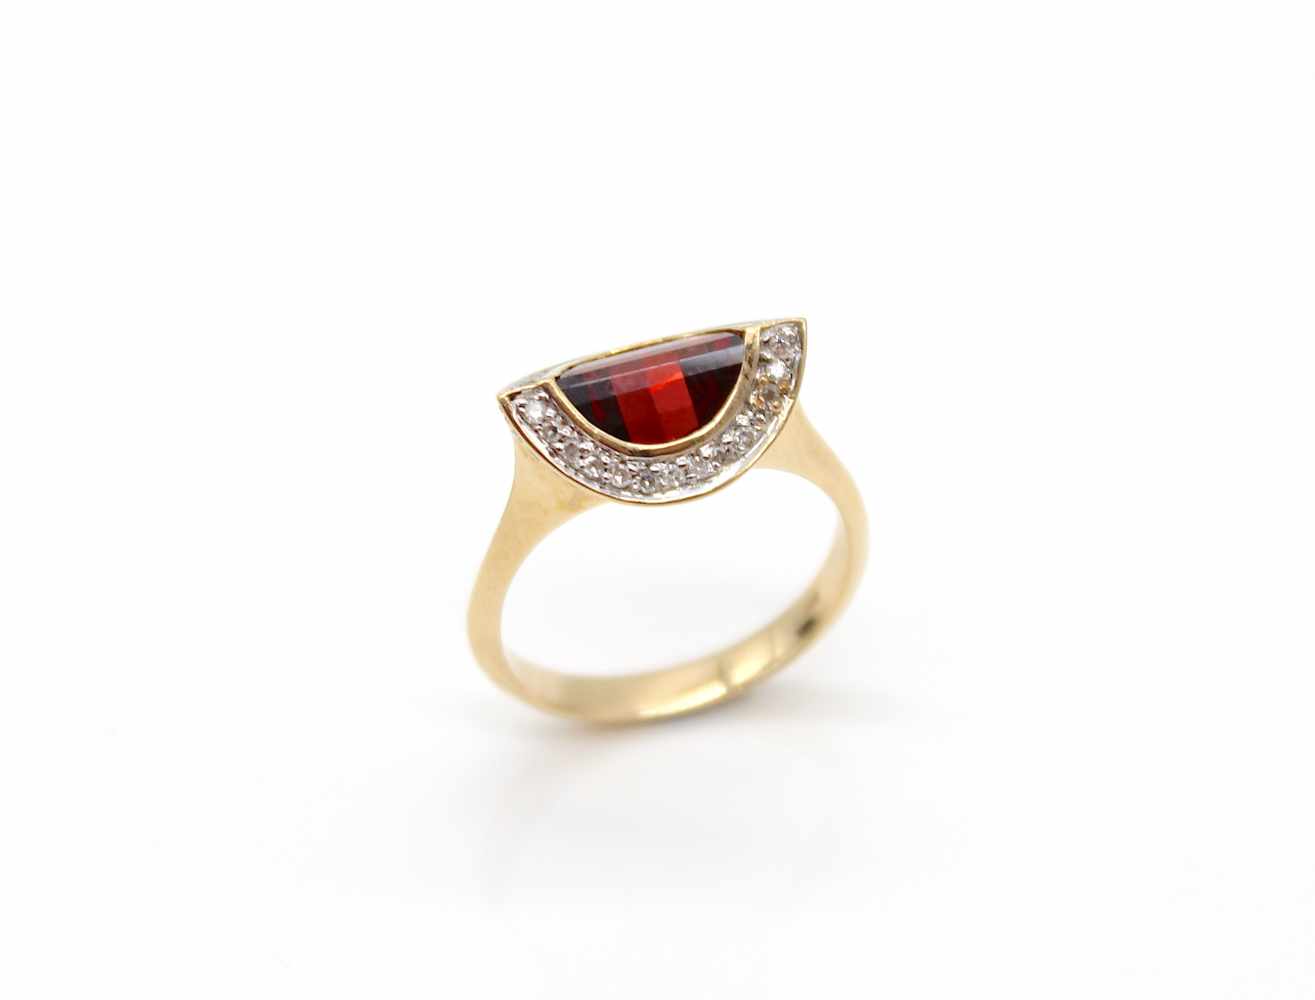 Ring made of 585 gold with a garnet and small diamonds.Weight 5 g, size 56- - -15.00 % buyer's